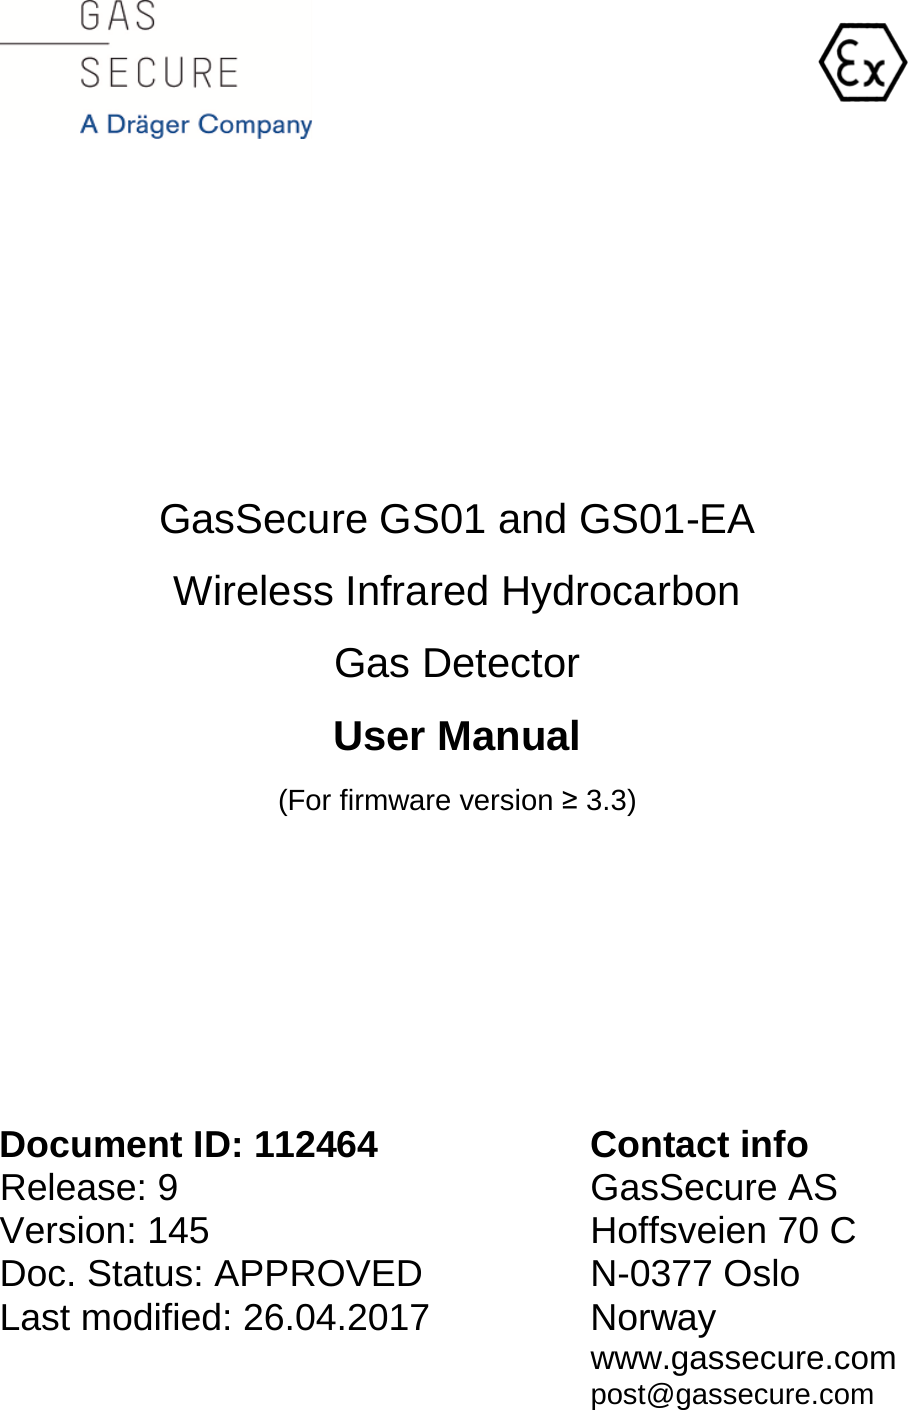                                                                 GasSecure GS01 and GS01-EA Wireless Infrared Hydrocarbon Gas Detector User Manual (For firmware version ≥ 3.3)          Document ID: 112464 Contact info Release: 9    GasSecure AS Version: 145    Hoffsveien 70 C Doc. Status: APPROVED  N-0377 Oslo Last modified: 26.04.2017 Norway     www.gassecure.com     post@gassecure.com          